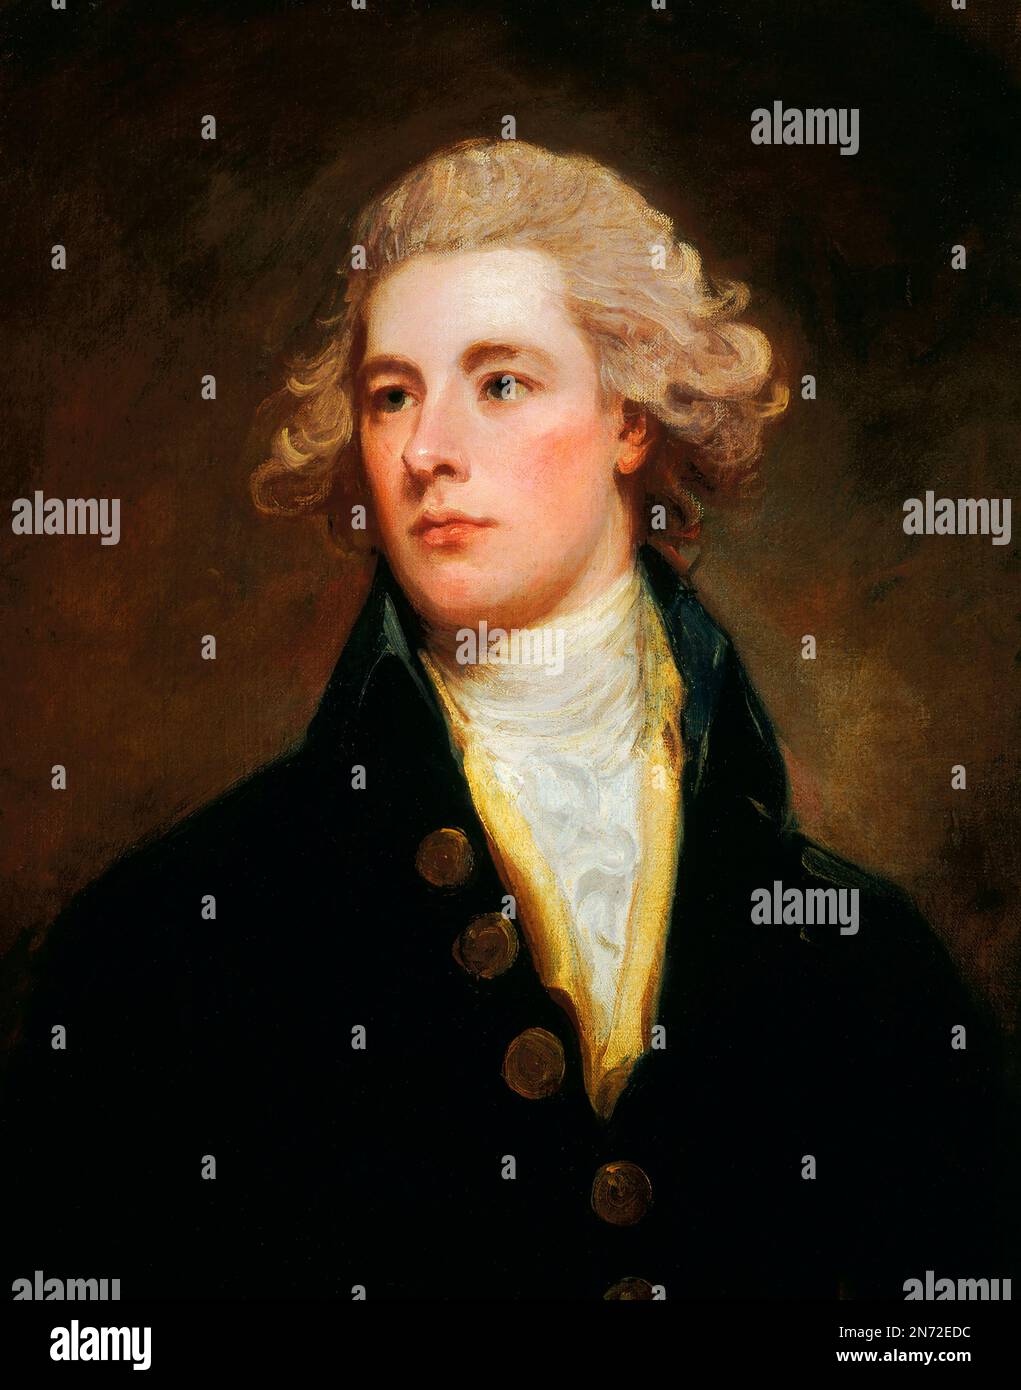 William Pitt. Portrait of William Pitt the Younger (1759-1806), British Prime Minister at the end of the 18th and beginning of 19th centuries. Painting by George Romney, oil on canvas, c. 1783 Stock Photo